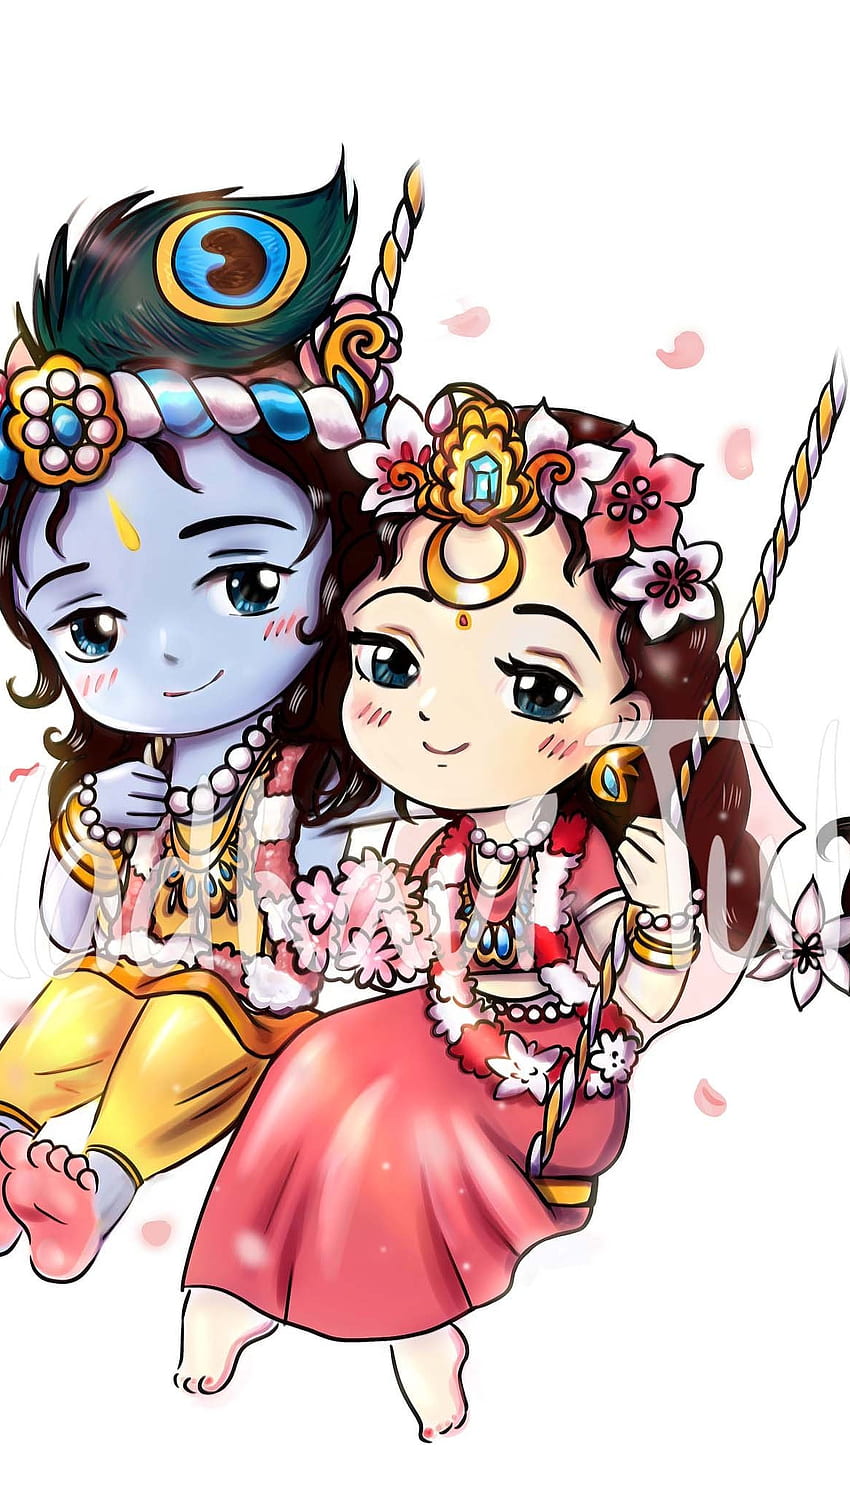 Incredible Collection of 999+ Adorable Radha Krishna Images – Stunning Full 4K Quality